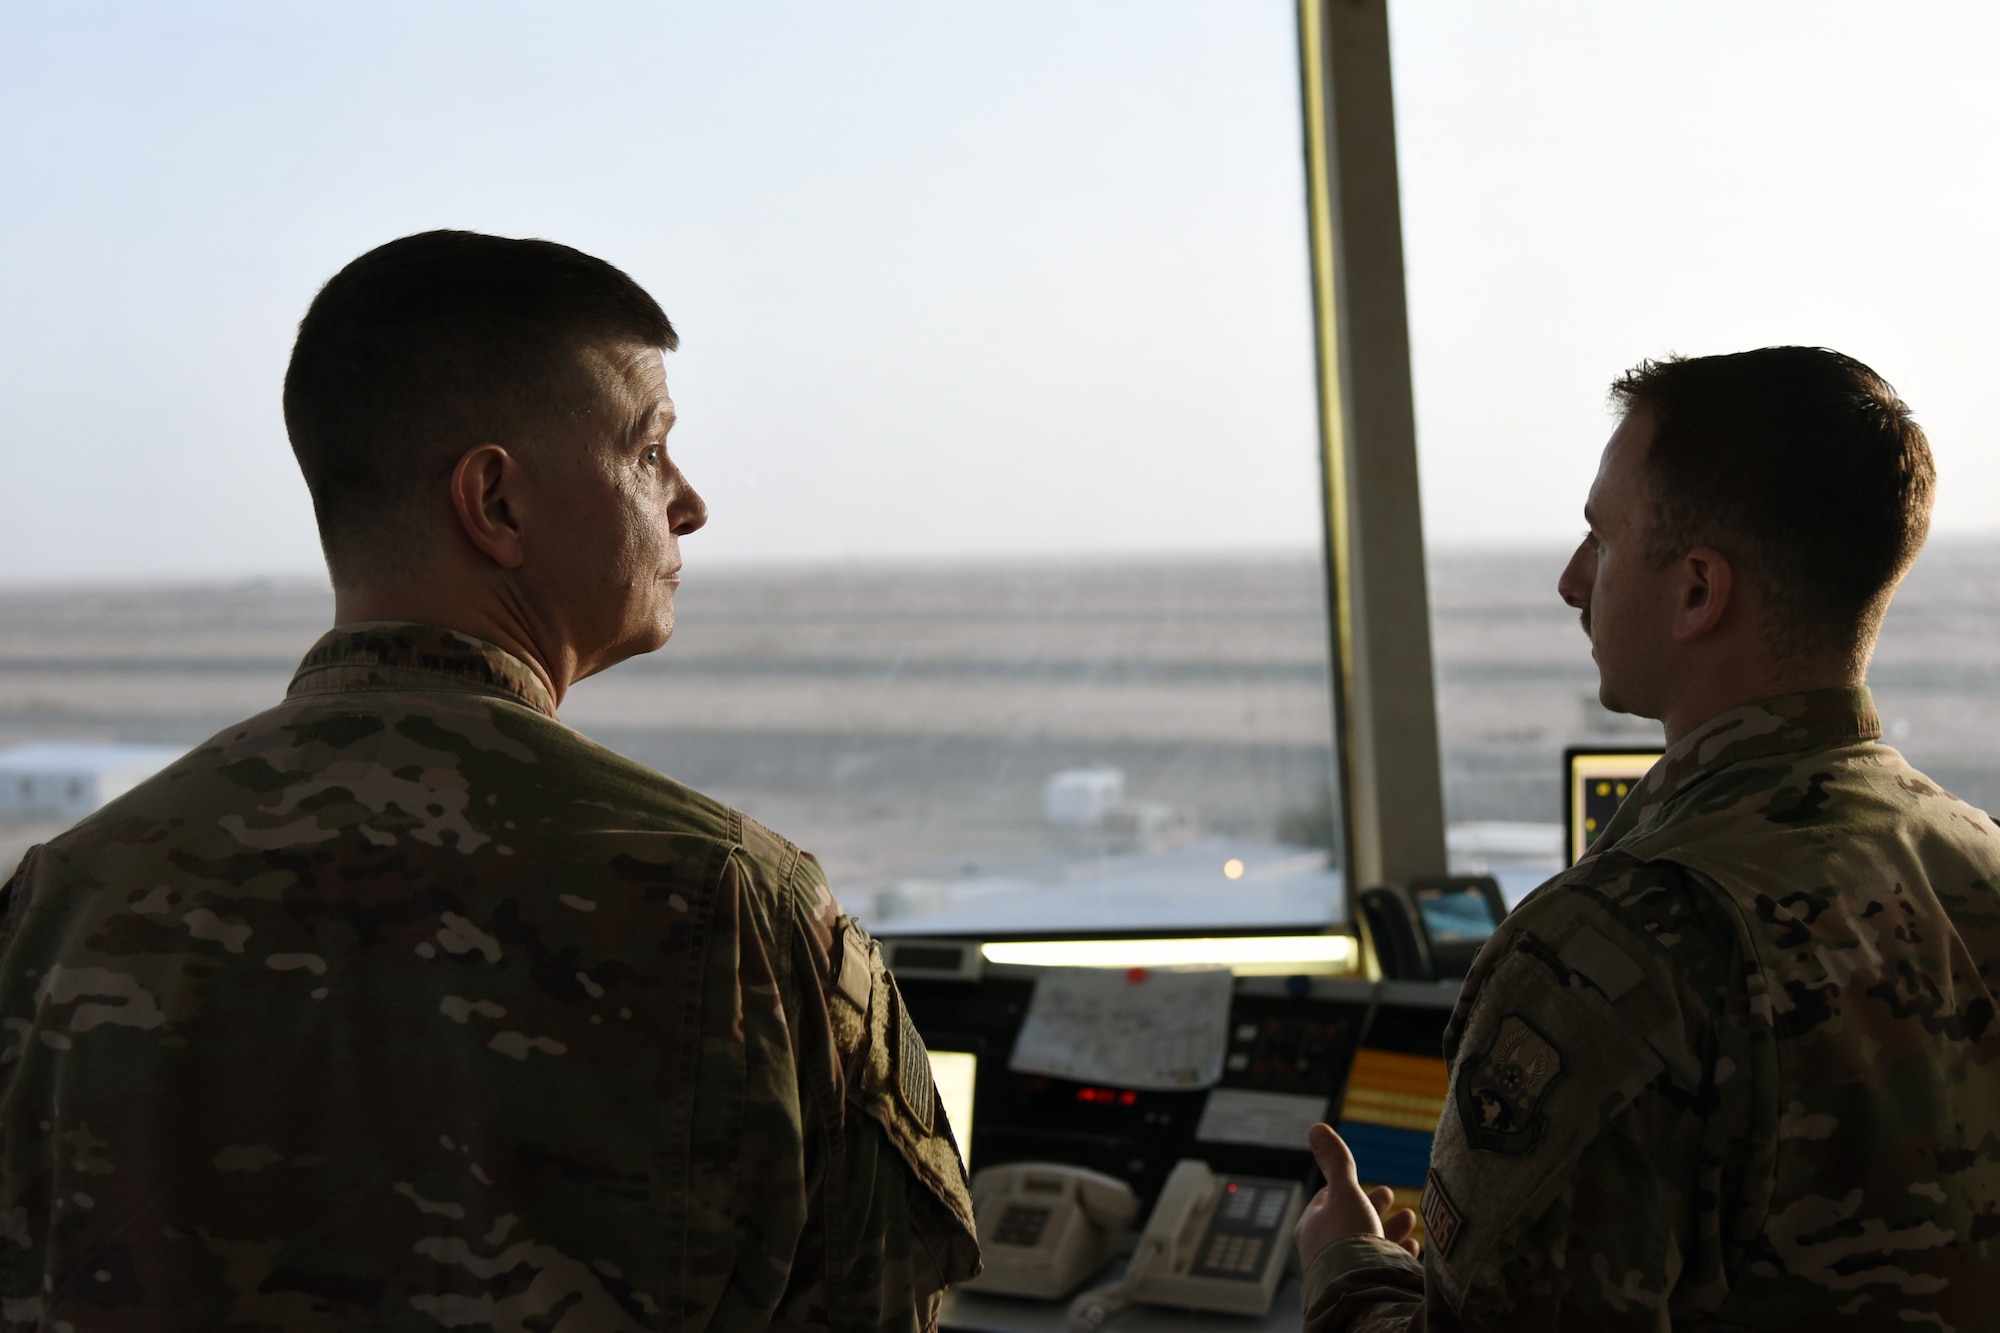 U.S. Air Force Brig. Gen. Kyle Robinson, 332nd Air Expeditionary Wing commander, tours the air traffic controller with 1st Lt. Ryan Royer, 407th Expeditionary Operation Support Squadron Airfield Operations Flight commander, at an undisclosed location in Southwest Asia March 5. Royer and other commanders showed Robinson different sections of the base to give him an overview of the 407th Air Expeditionary Group. (U.S. Air Force photo by Staff Sgt. Joshua Edwards/Released)